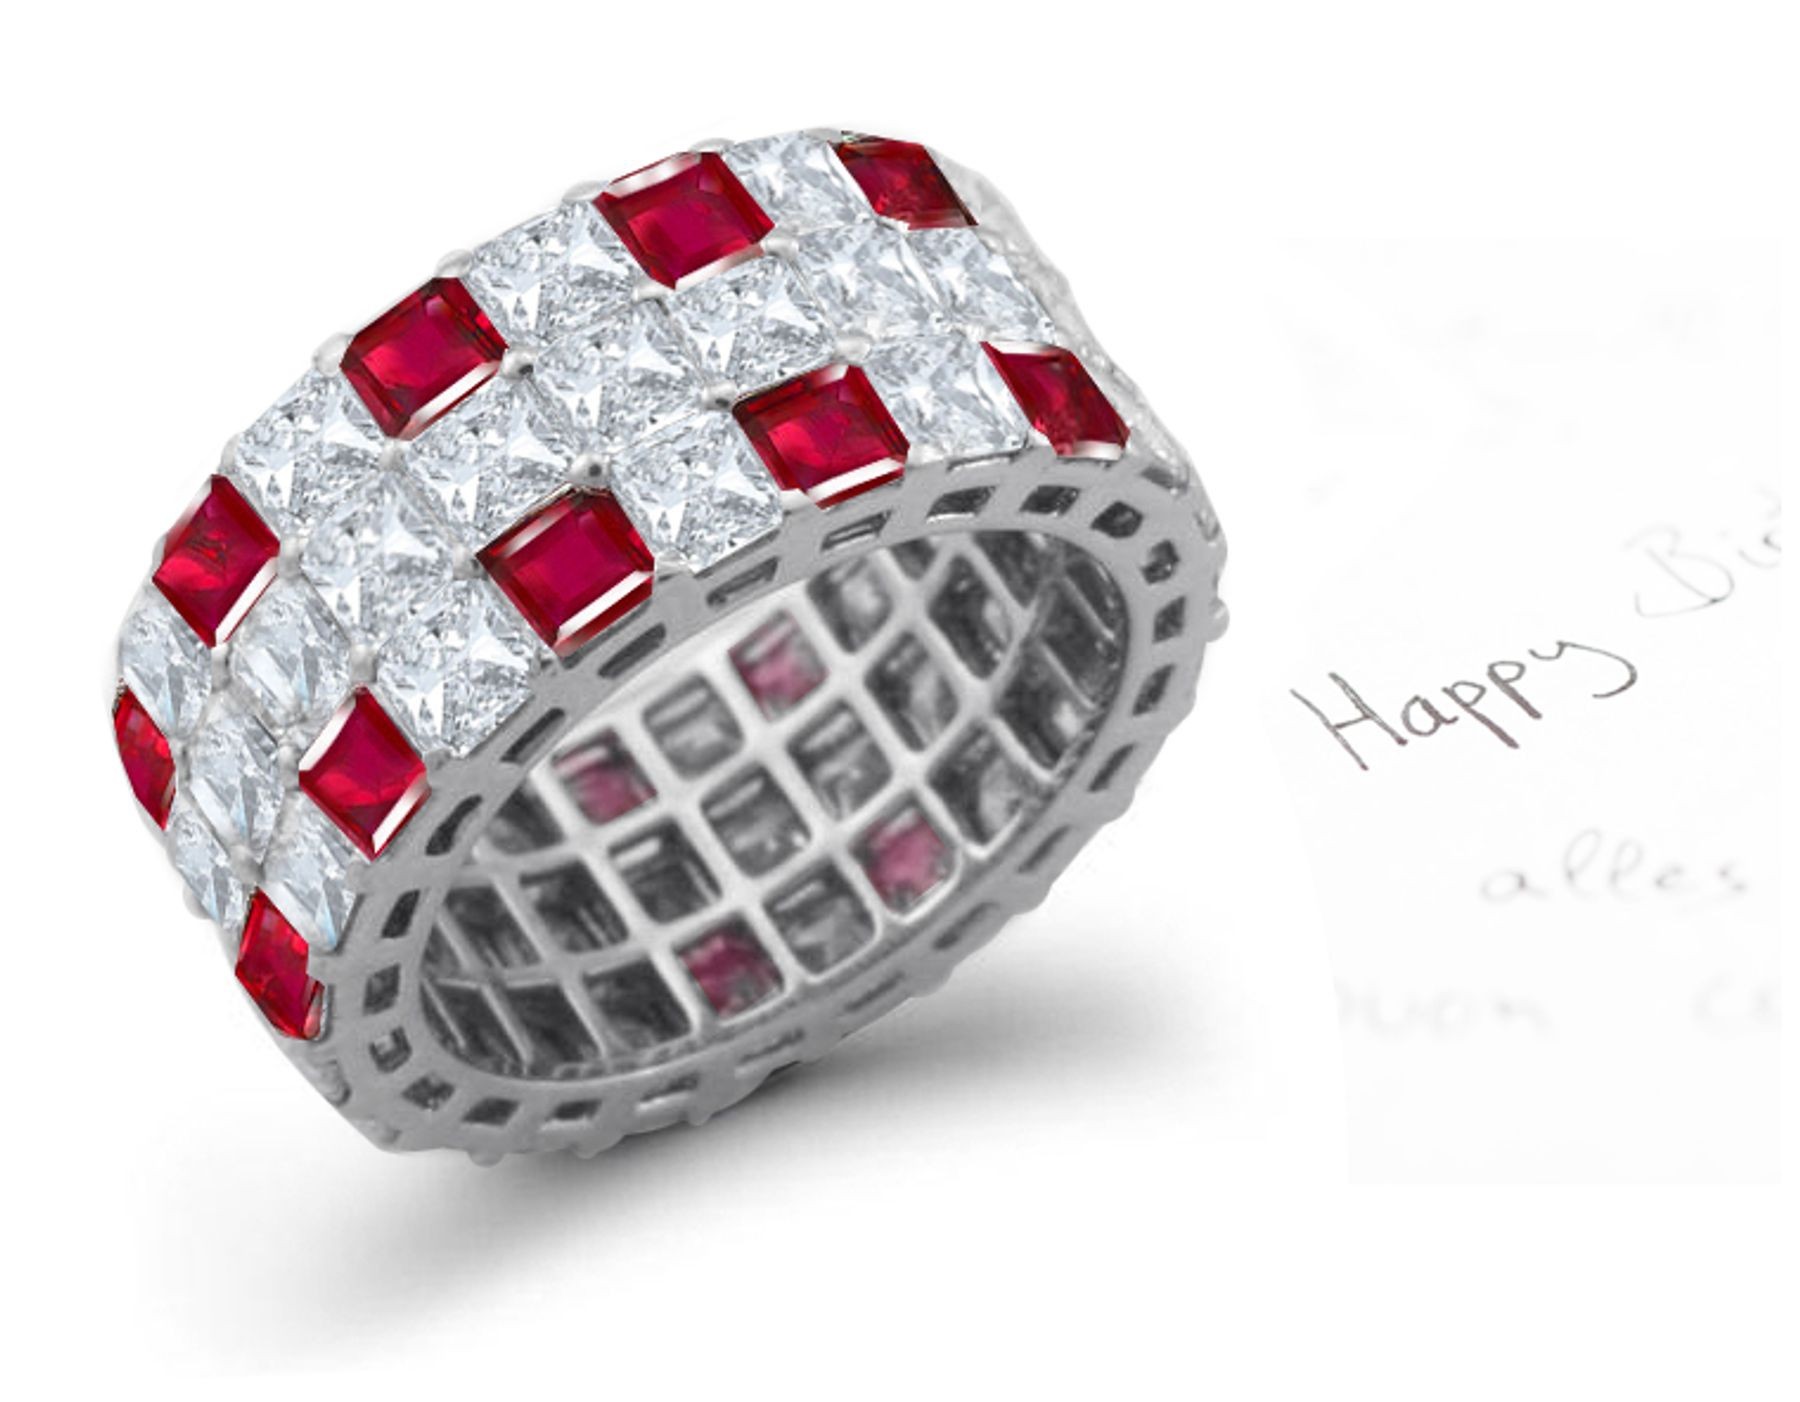 Beauty of Design: 2012 New Eternity Ring Designer Collection